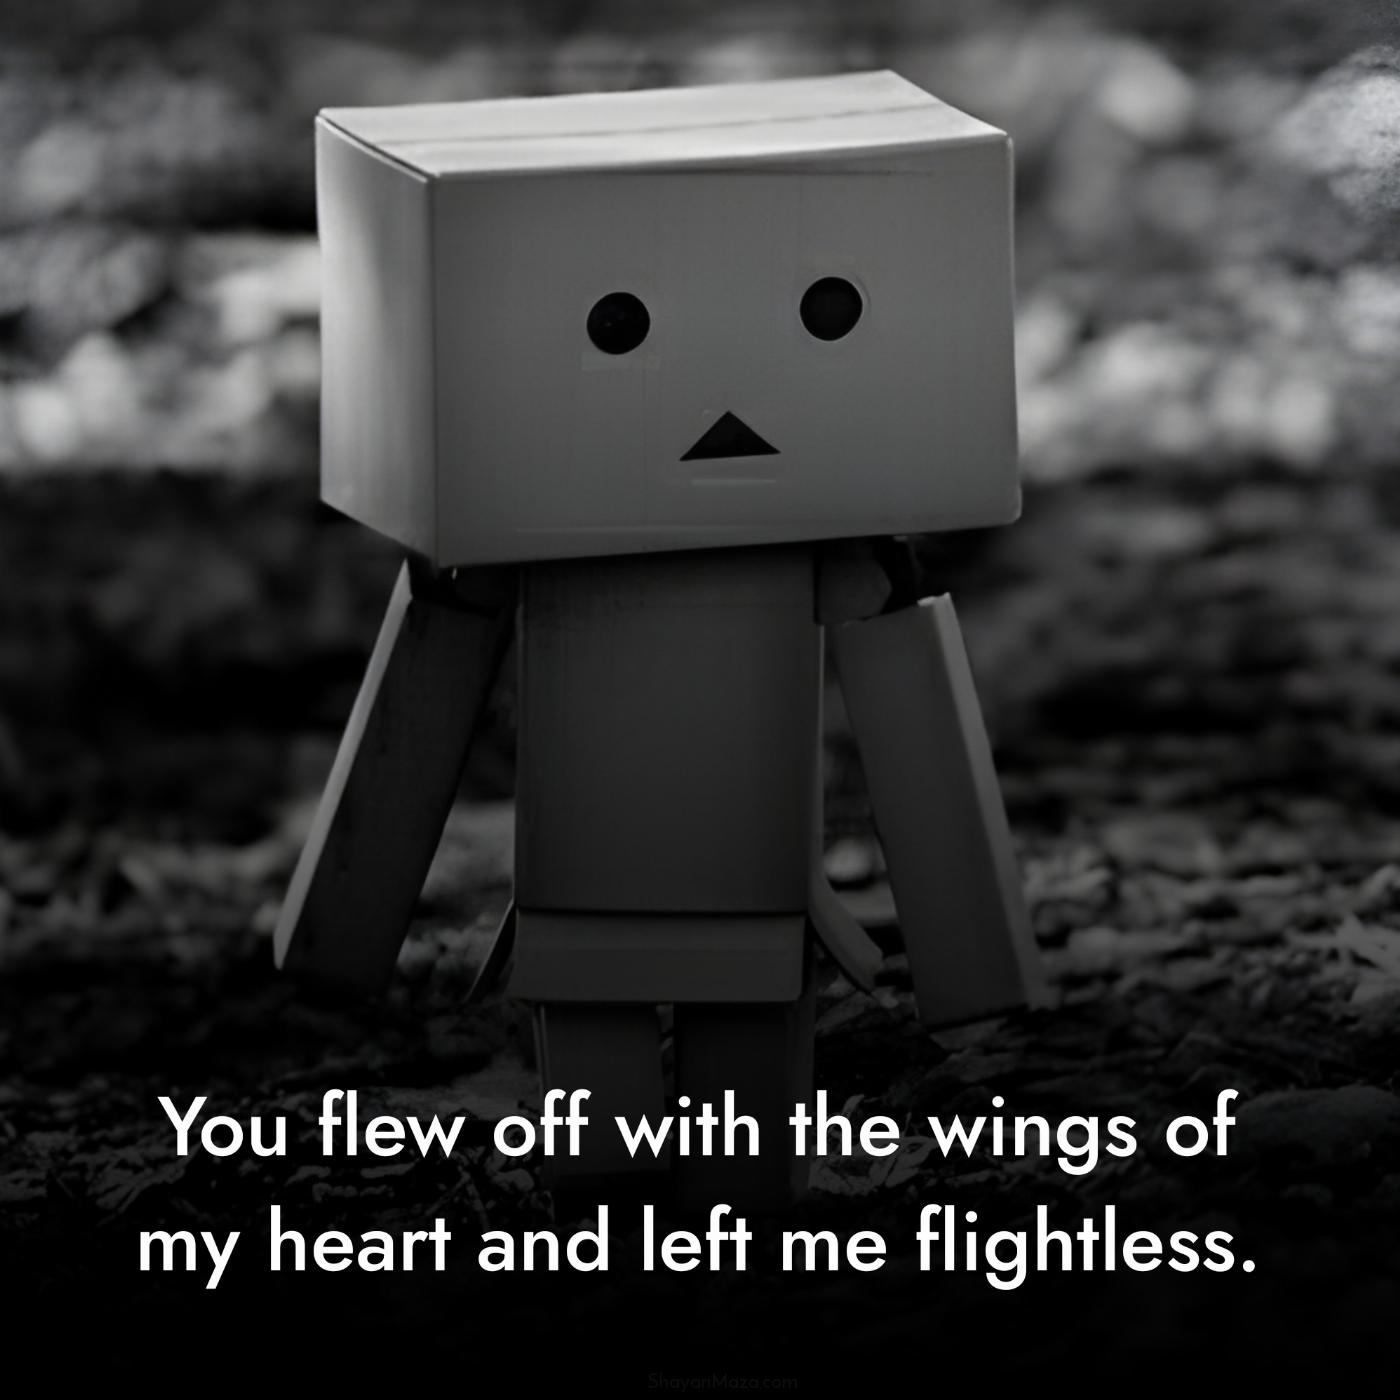 You flew off with the wings of my heart and left me flightless